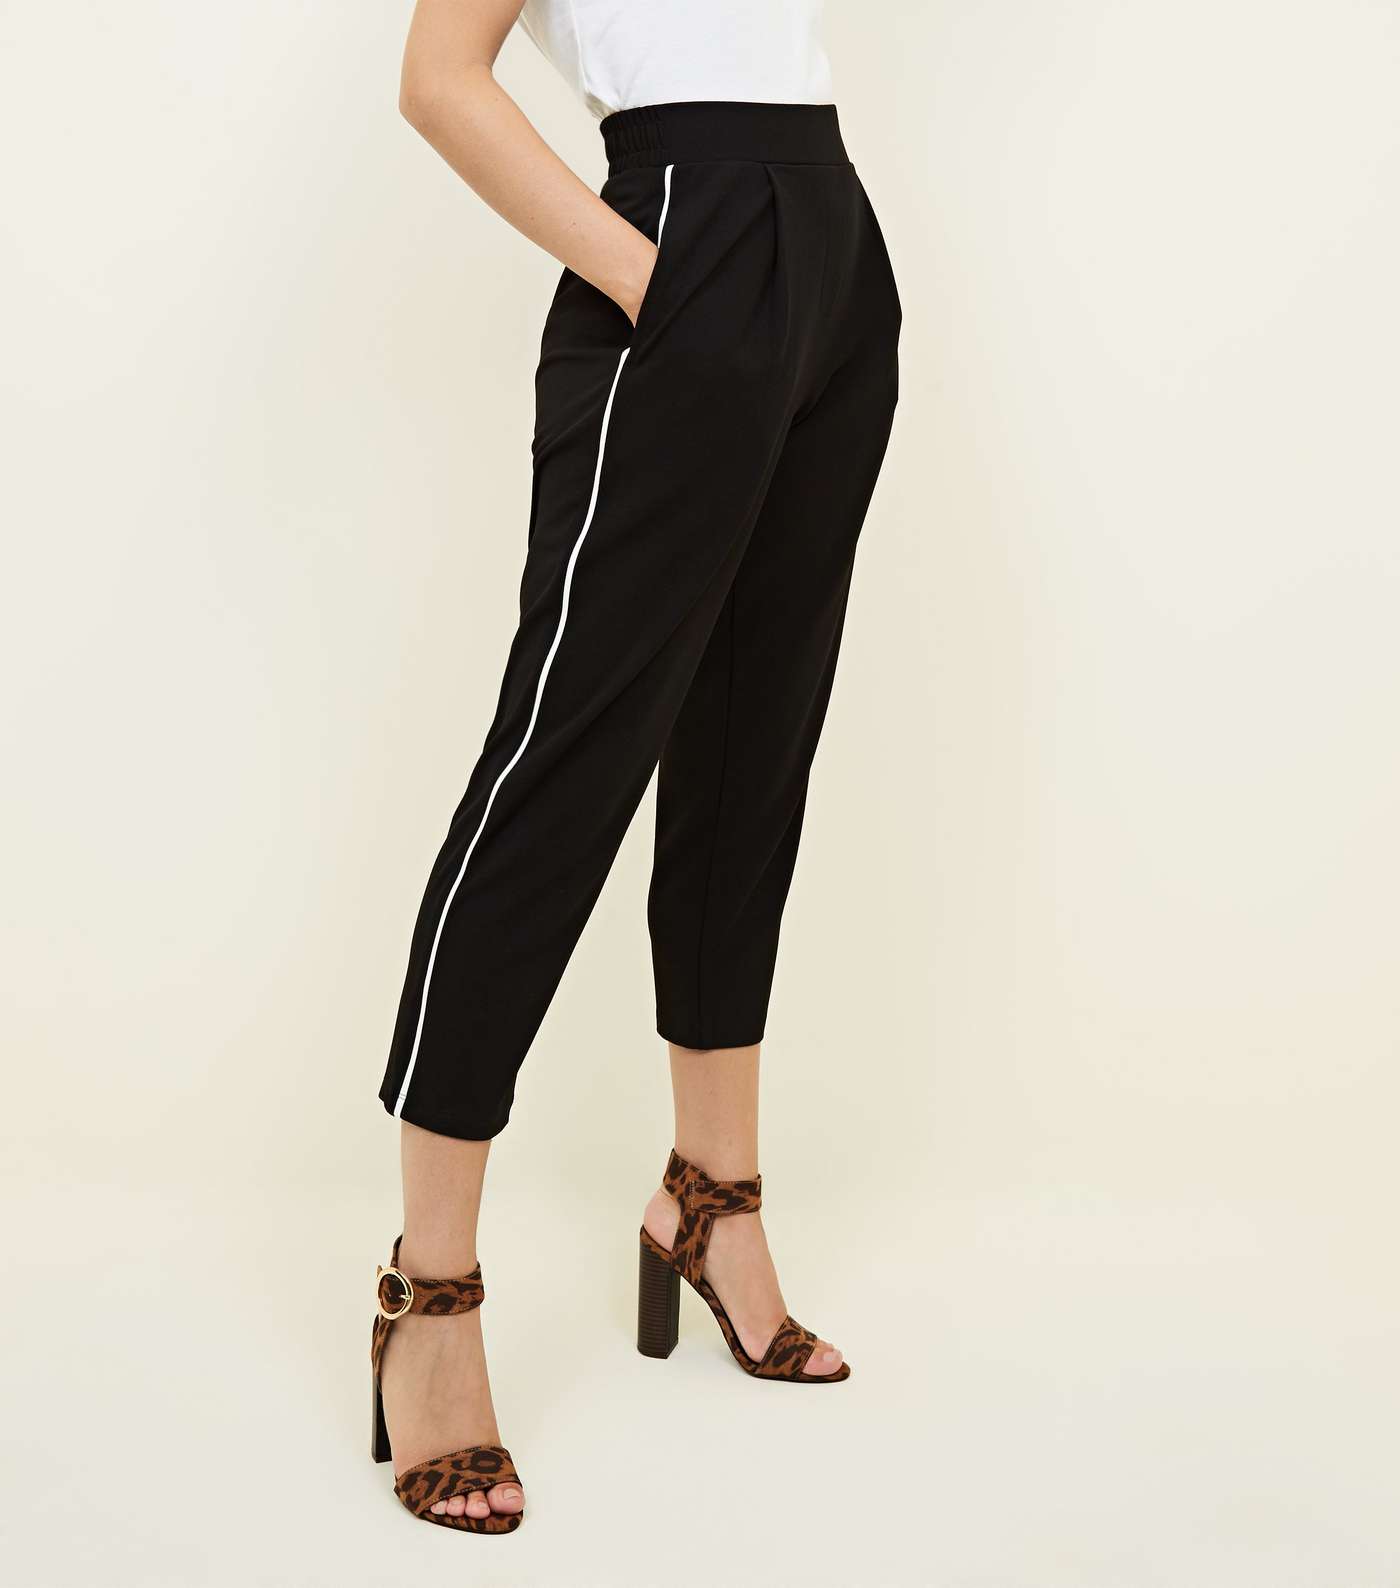 Petite Black Piped Side Stripe Tapered Trousers Image 2